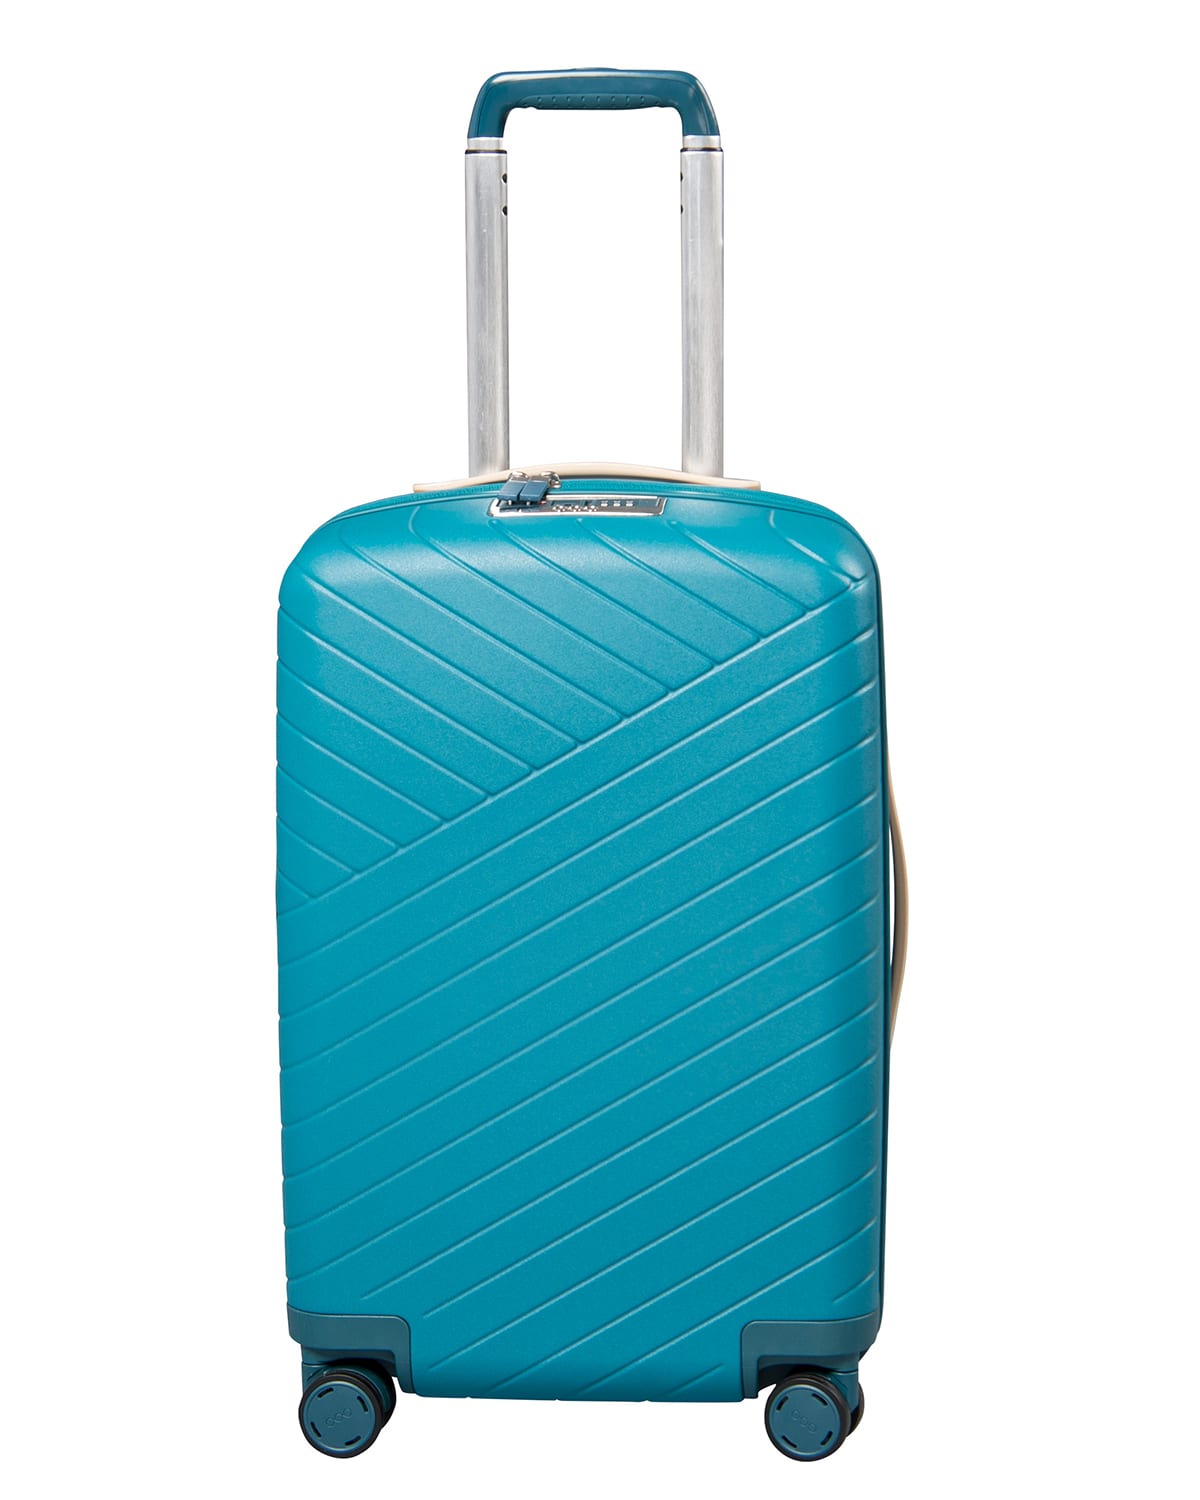 Expandable 22" Carry-On Spinner Luggage